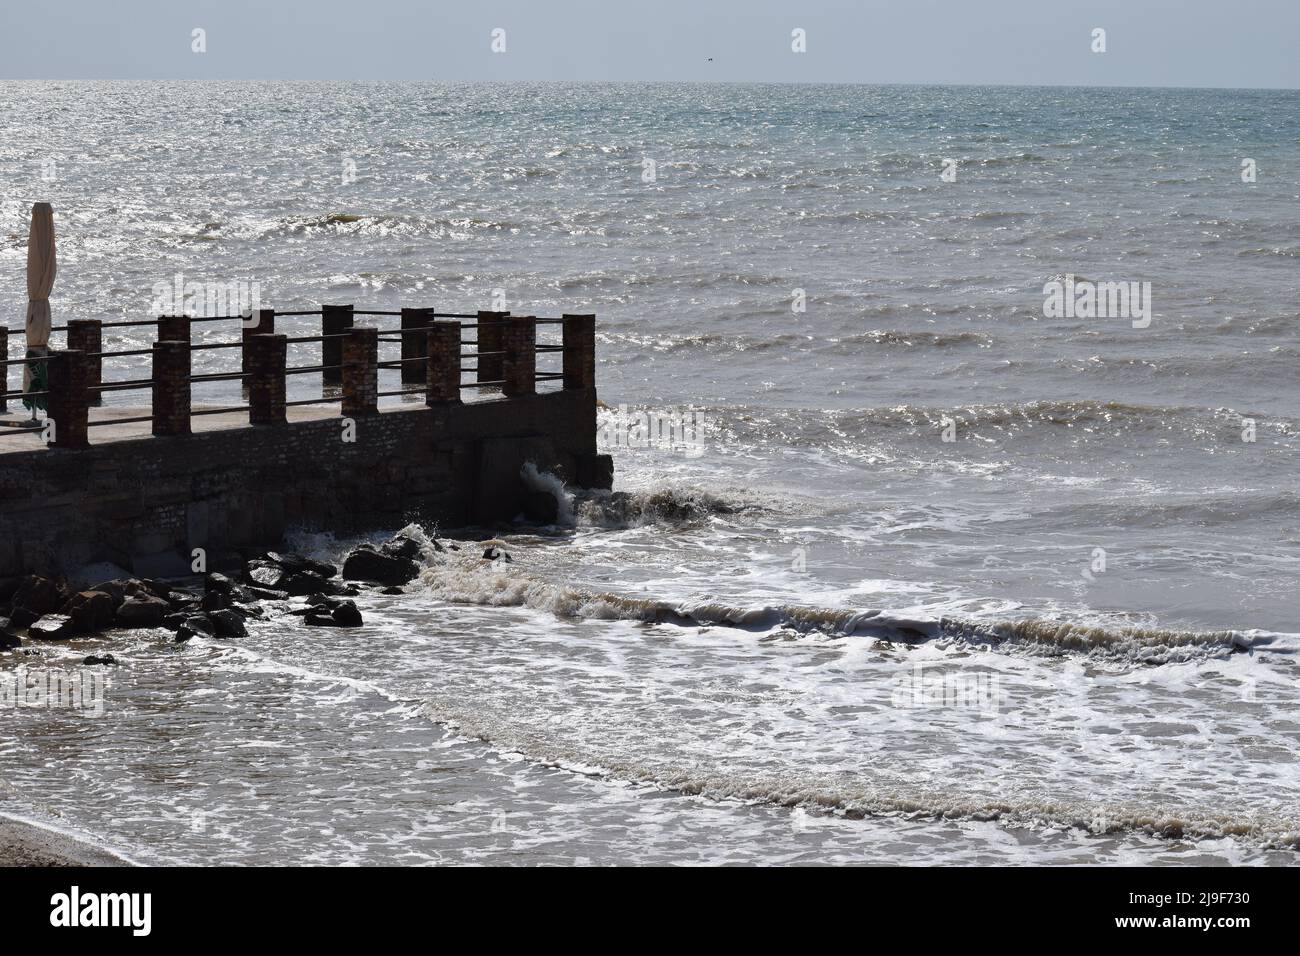 big sea waves splashing against a pier. The pier cuts the sea waves off the coast during a stormy sunny day. Stock Photo